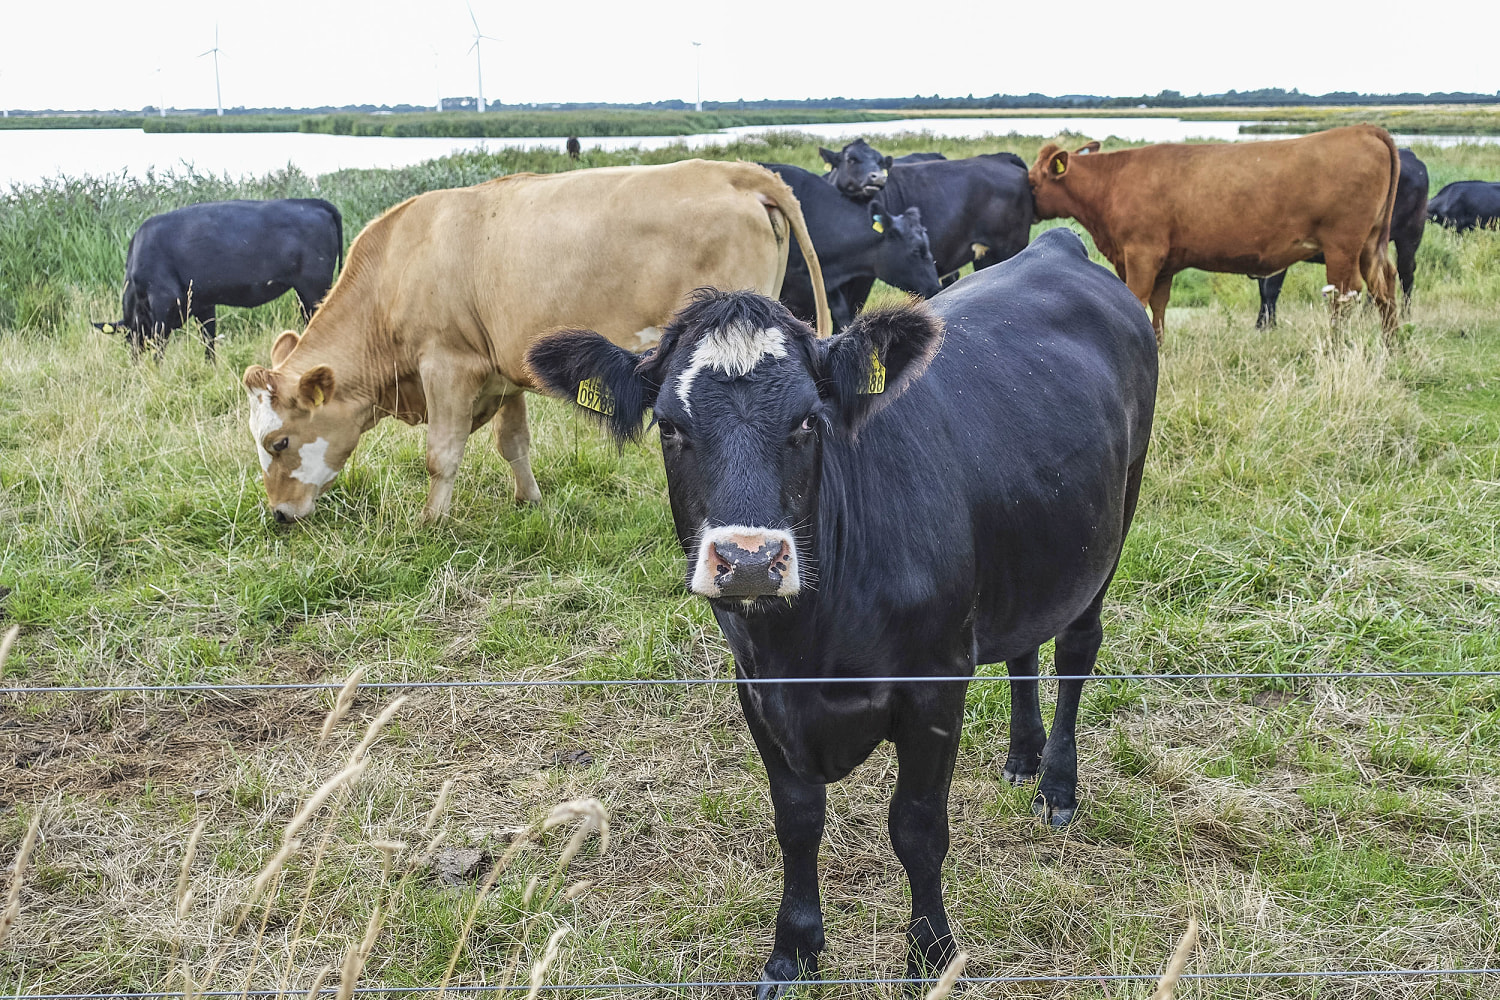 Gassy cows and pigs will face a carbon tax in Denmark — a world first